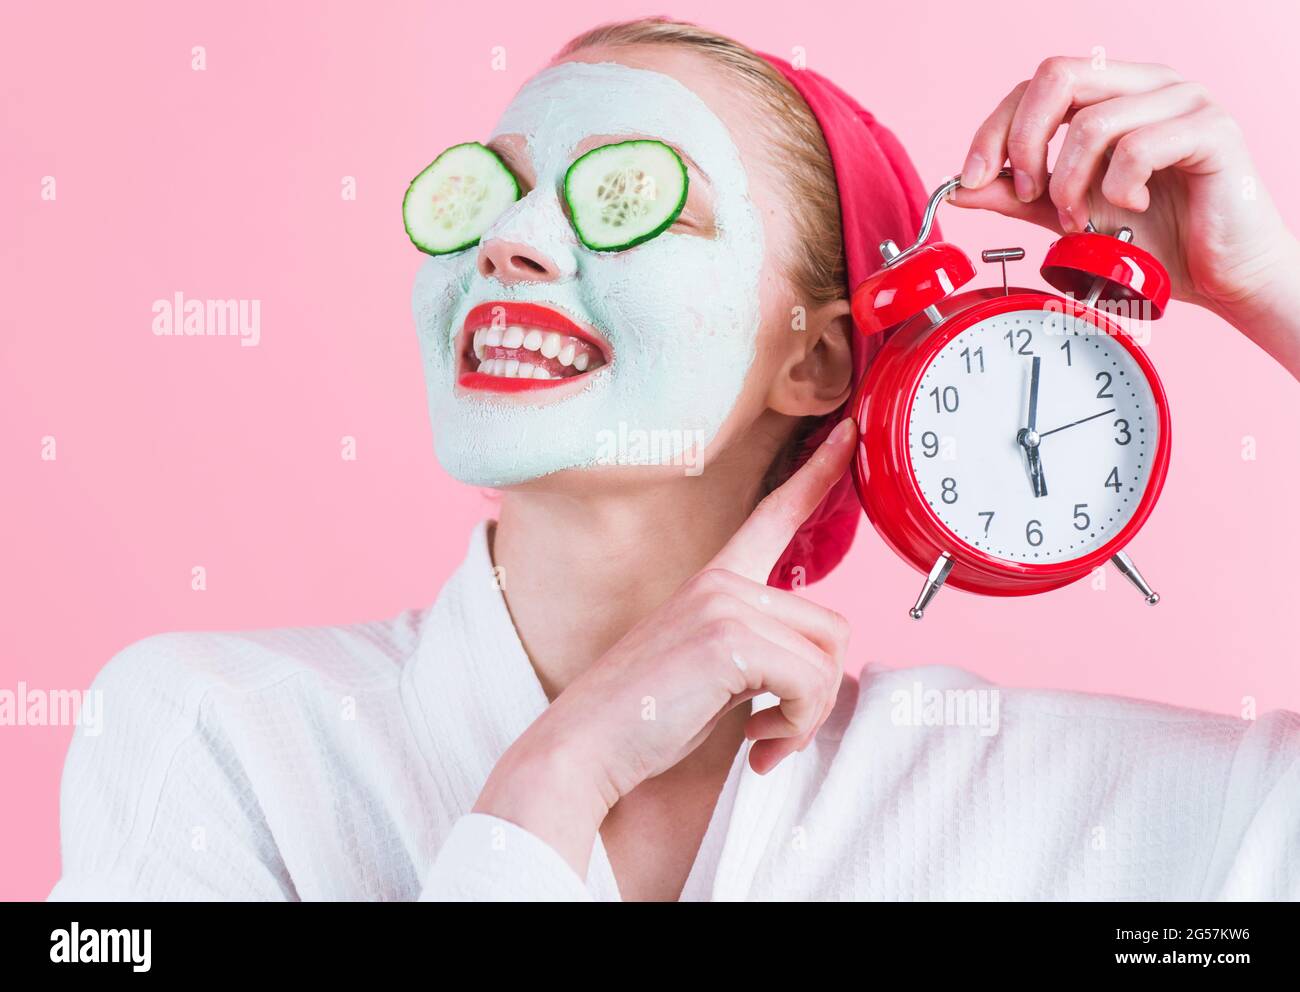 Smiling Woman with cosmetic facial mask and alarm clock in hand. Cosmetics procedure. Beauty spa and cosmetology. Stock Photo